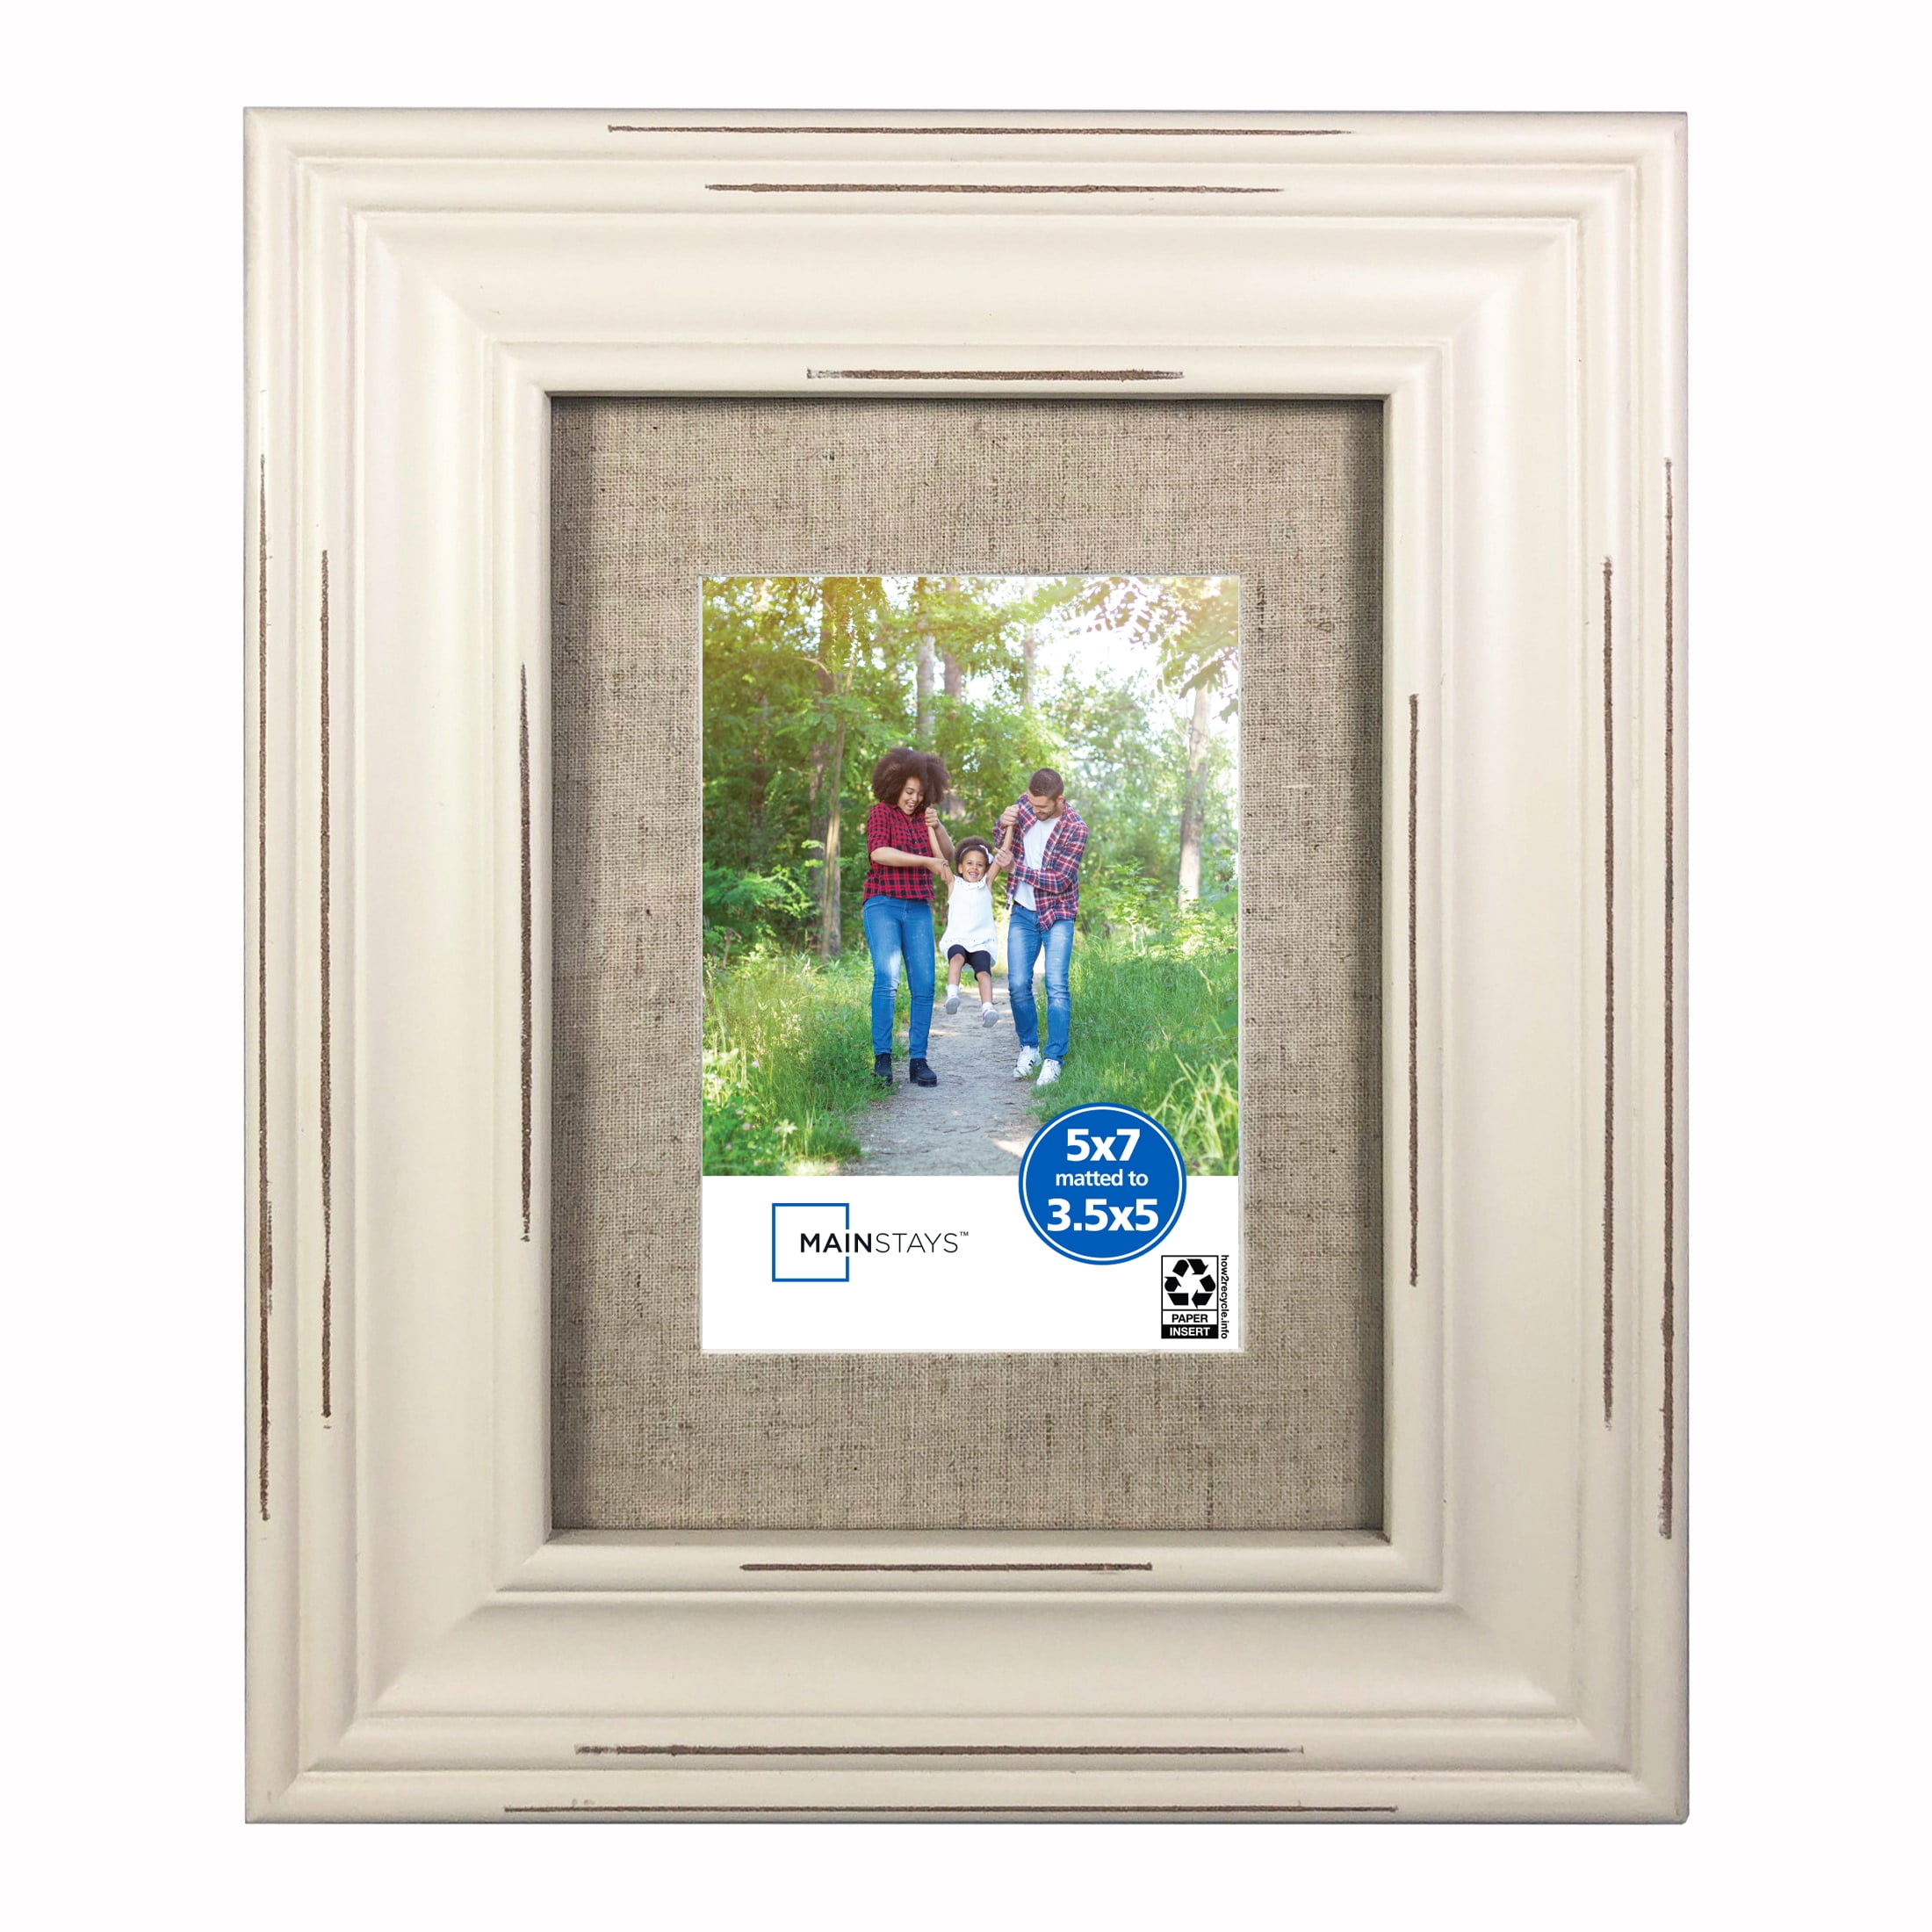 Mainstays 5" x 7" Matted to 3.5" x 5" Distressed White Picture Frame